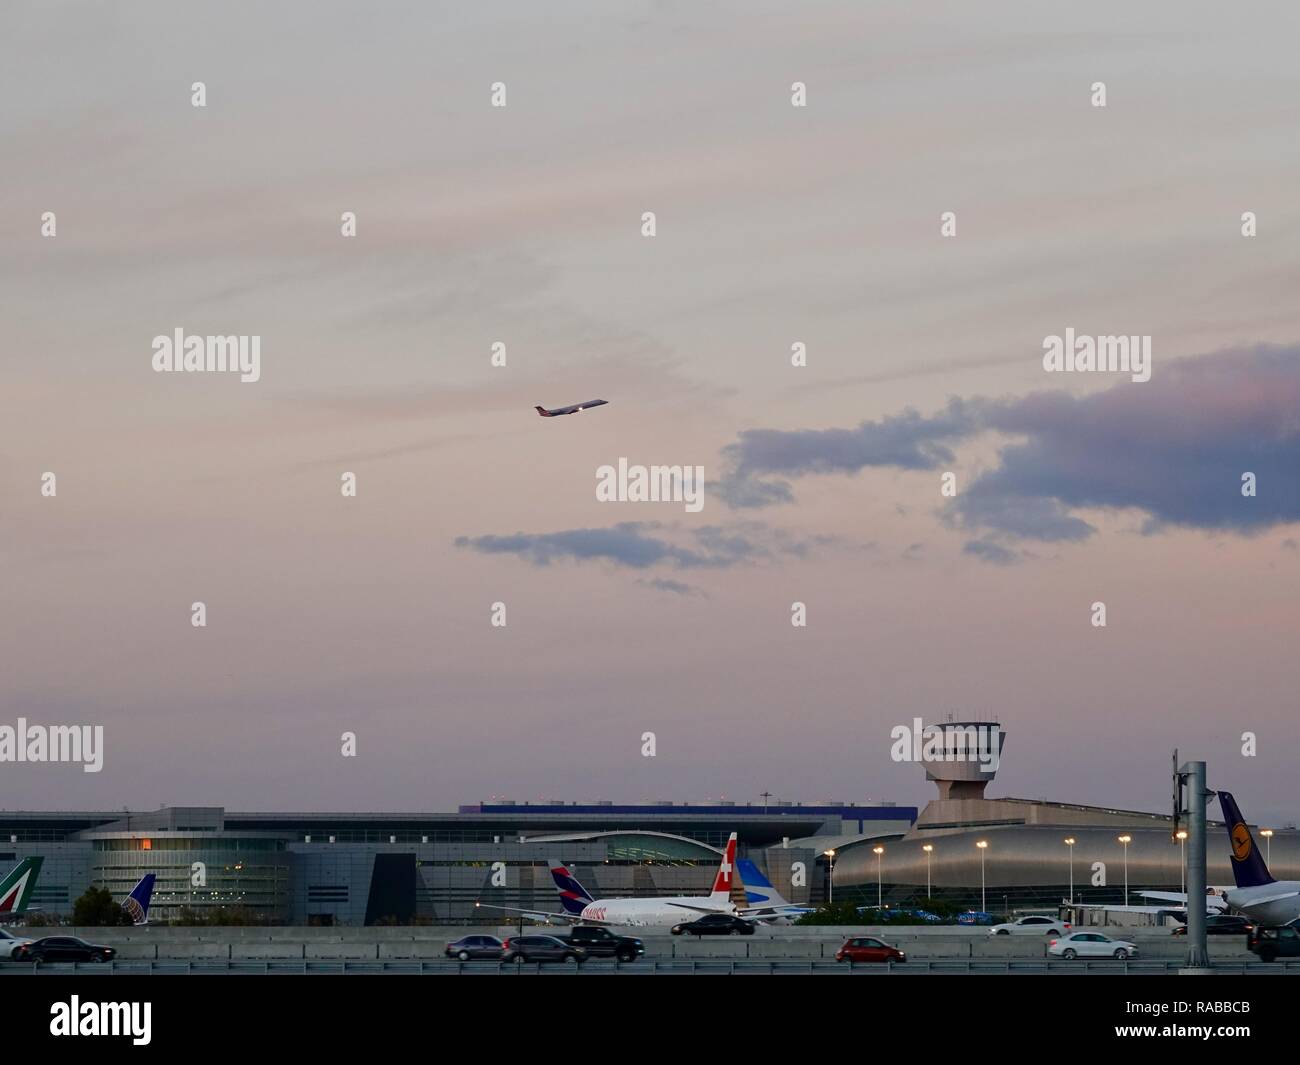 Airplane on takeoff above the Miami International Airport at dusk with Swiss Air jet in foreground, Miami, Florida, USA. Stock Photo